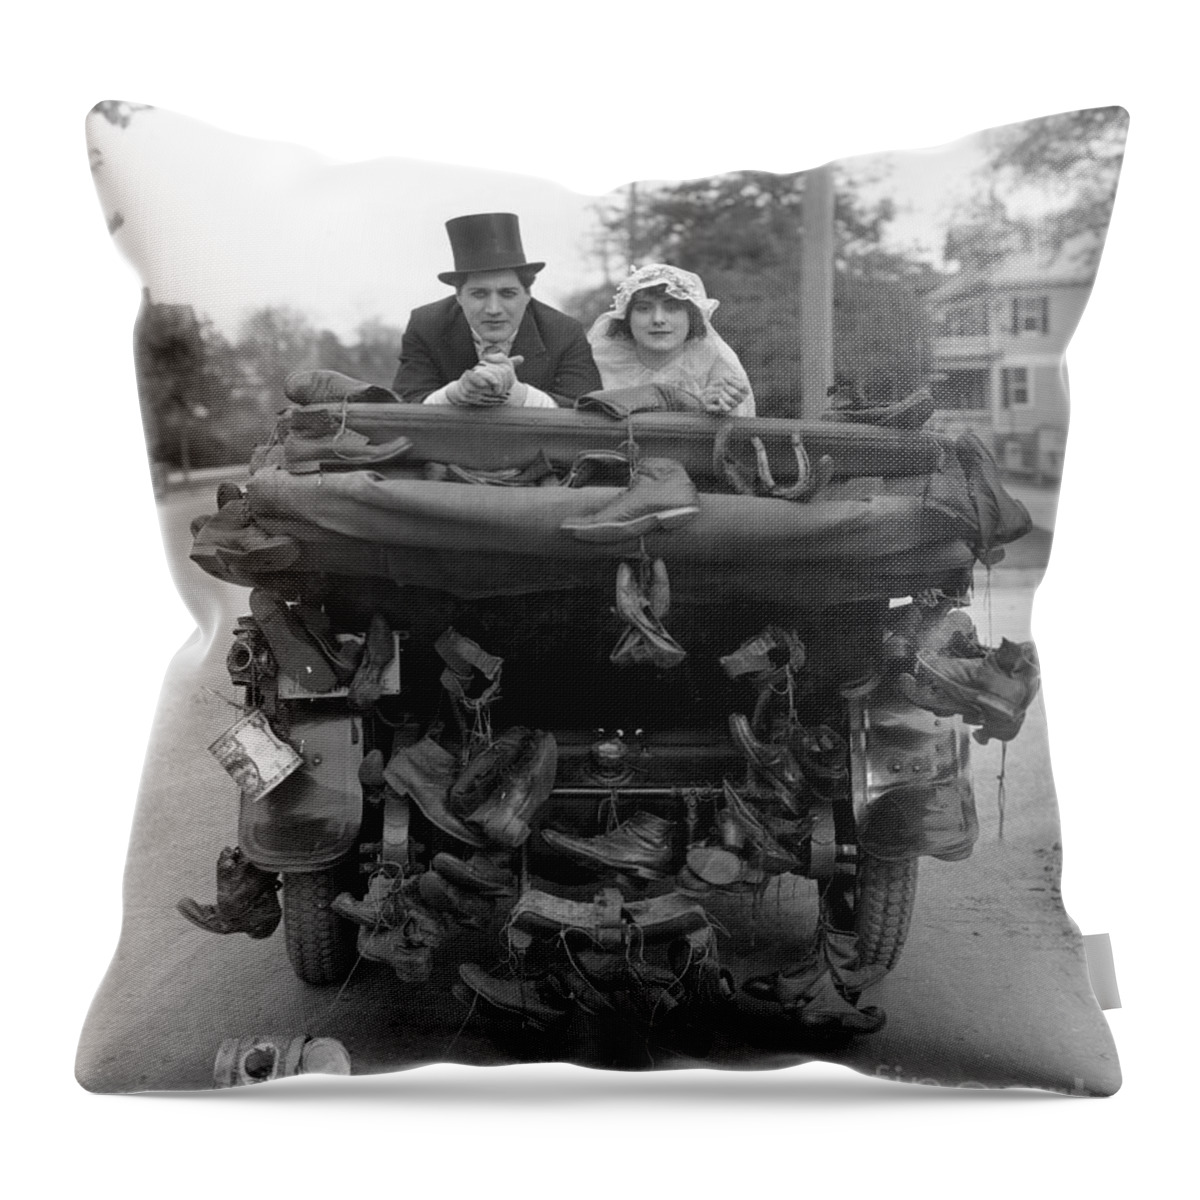 -weddings & Gowns- Throw Pillow featuring the photograph Film Still Wedding by Granger